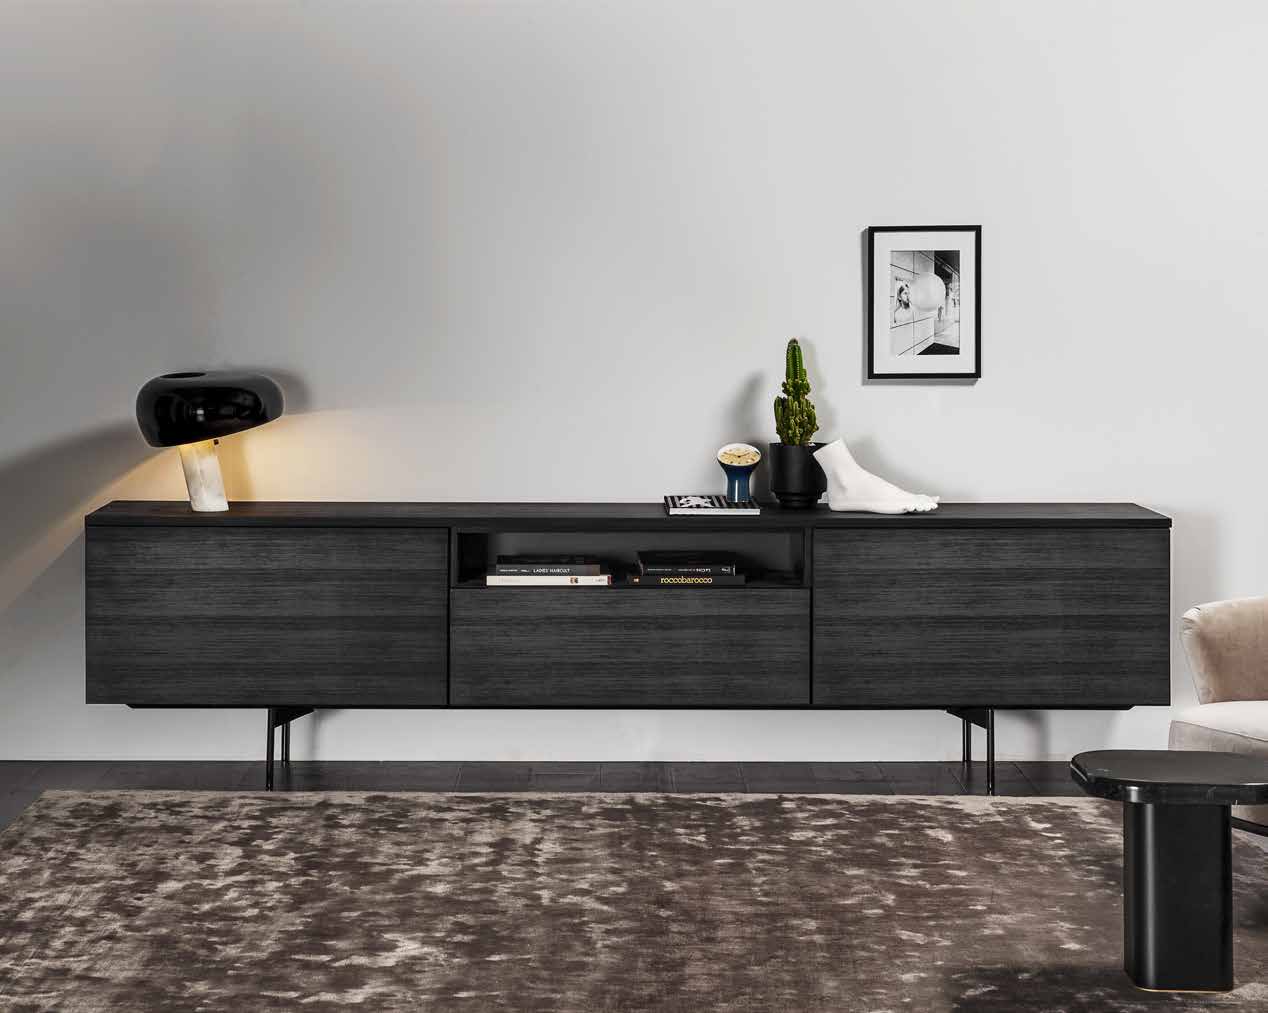 9770 MADIA SPACE | Sideboard by Vibieffe $5,280.00